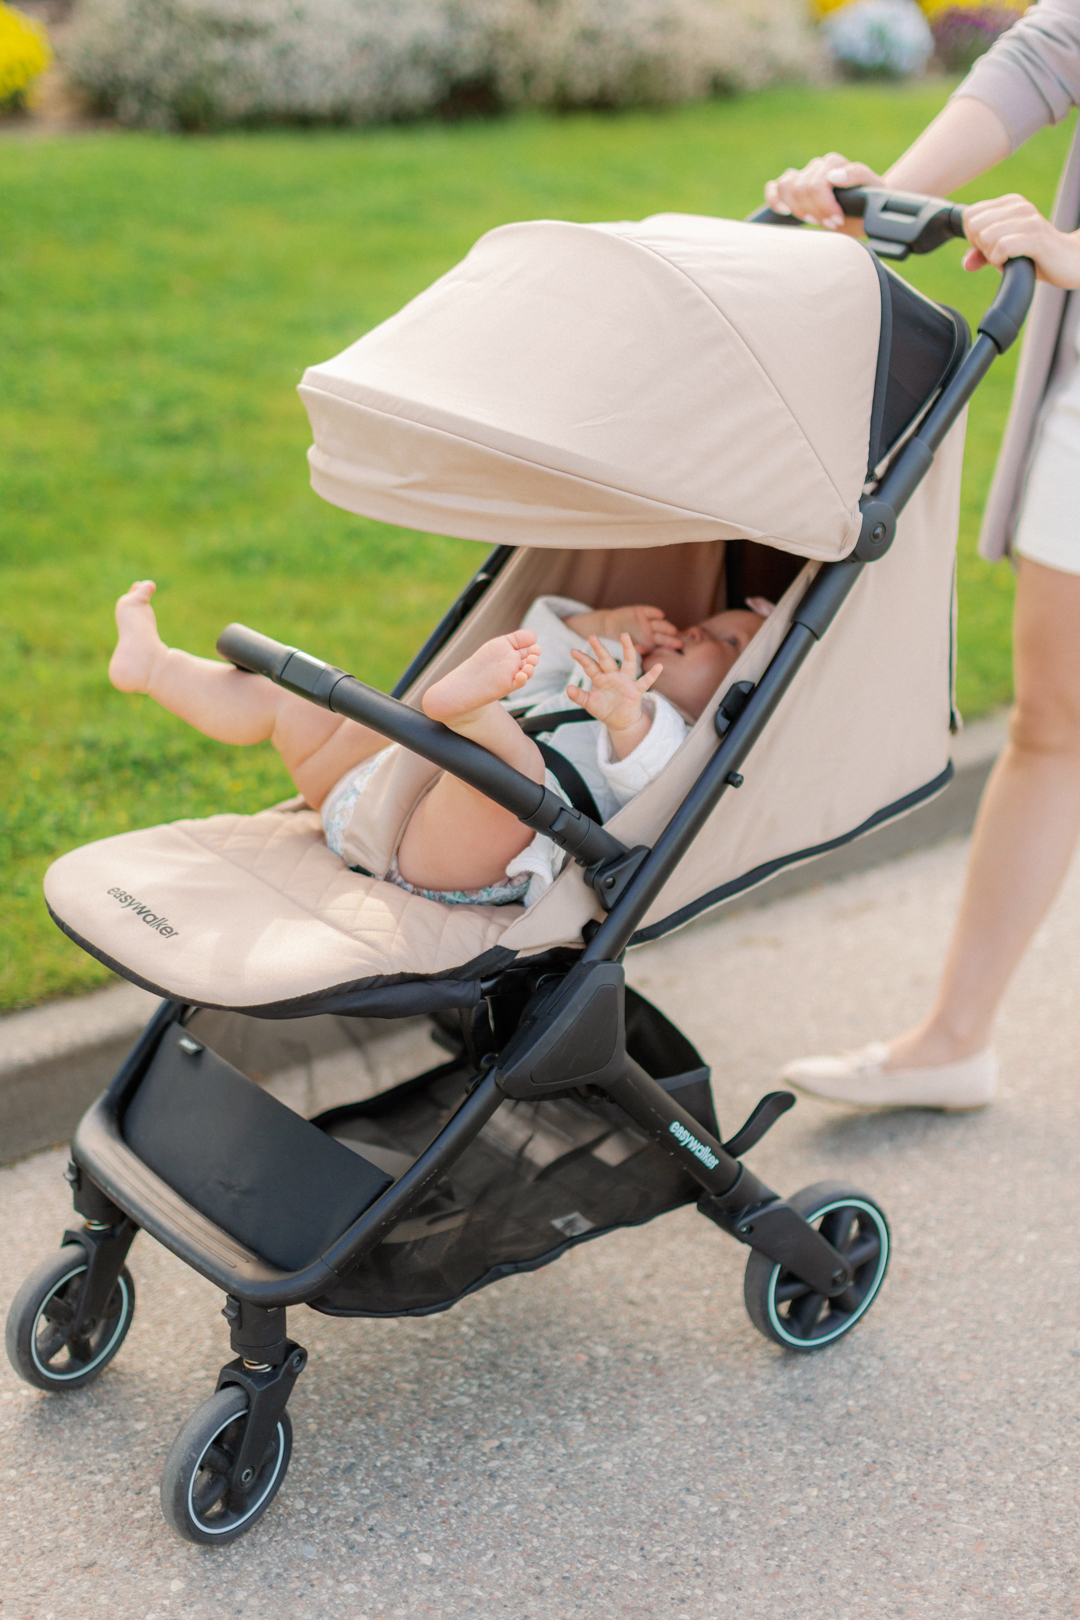 Easywalker Jackey stroller review opinions